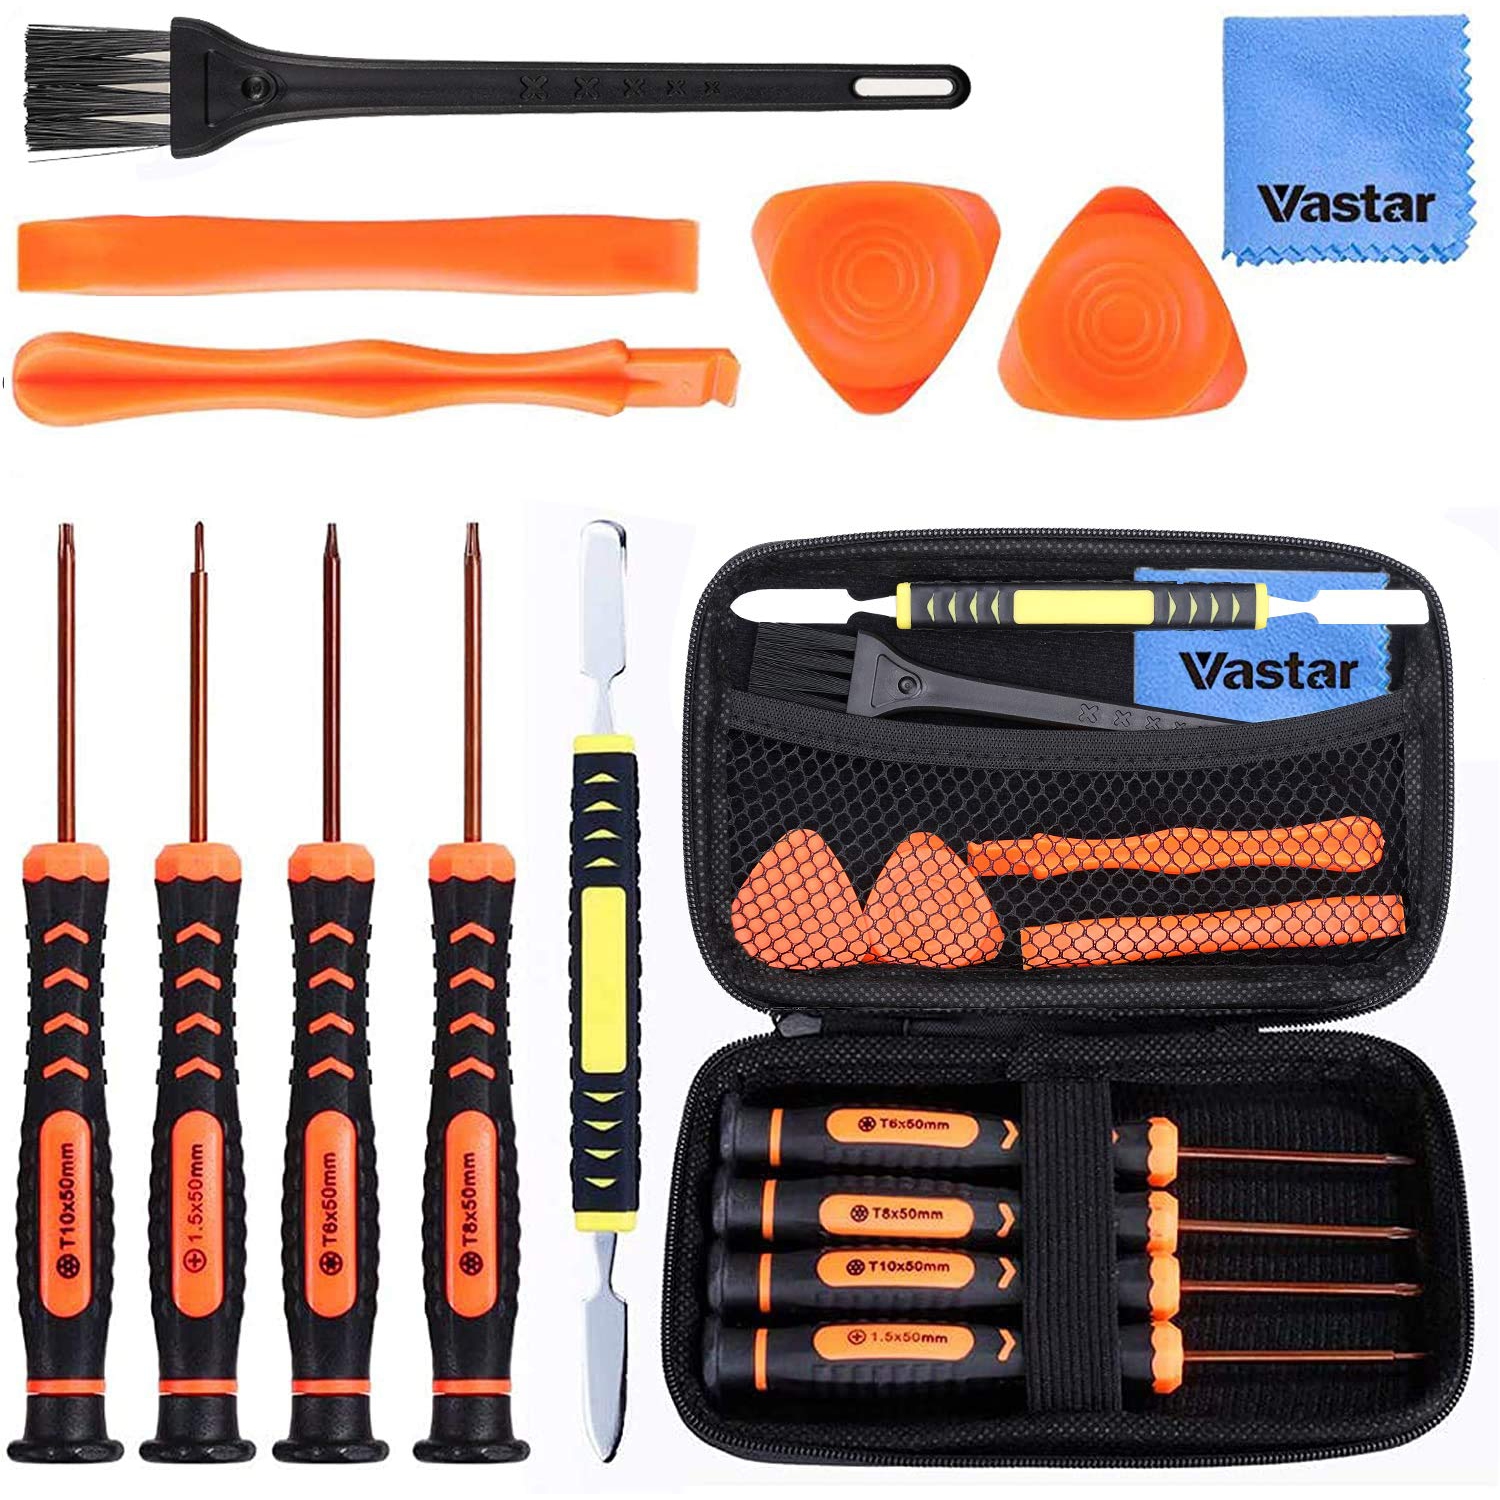 Vastar Repair Tool Kit for Xbox series X|S, Xbox One Xbox 360 PS3 PS4 PS5 Controller, 12 in 1 T6 T8 T10 Xbox One Screwdriver